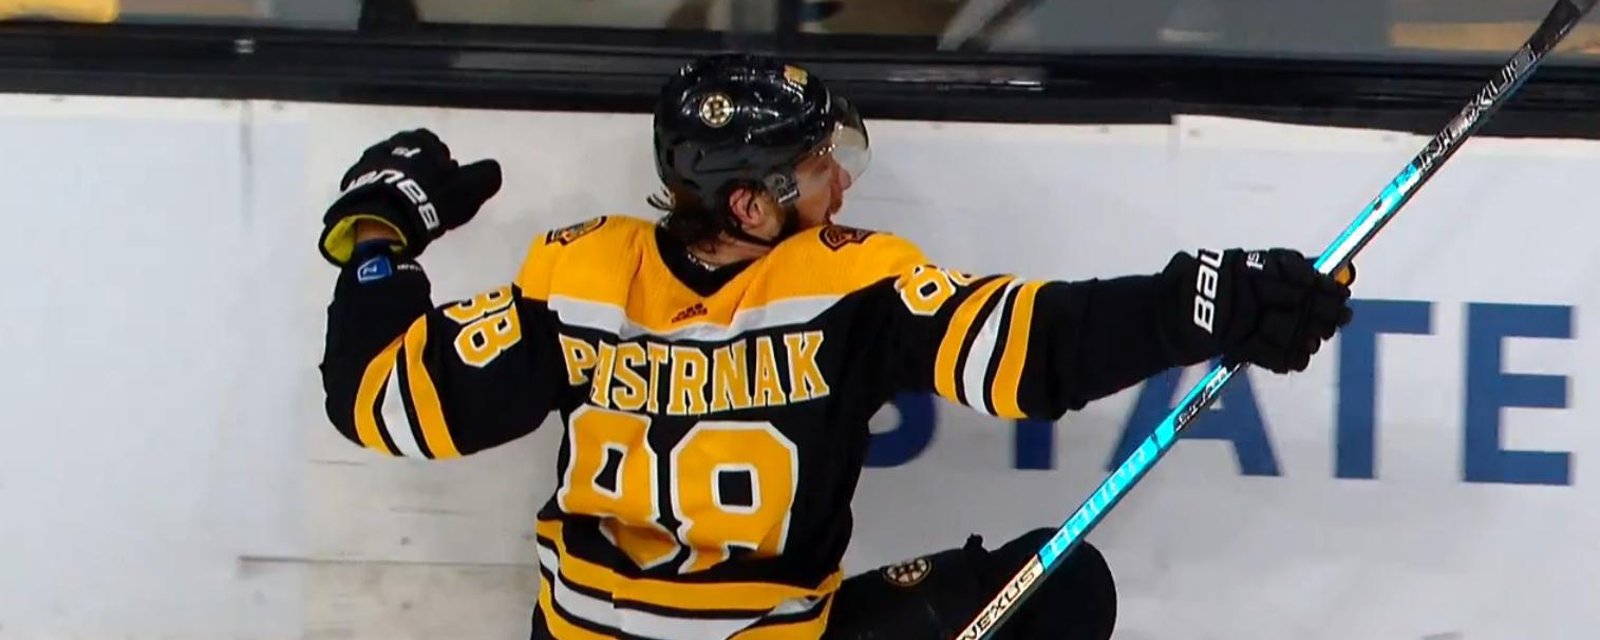 David Pastrnak opens the second round with a hat trick against the Islanders.